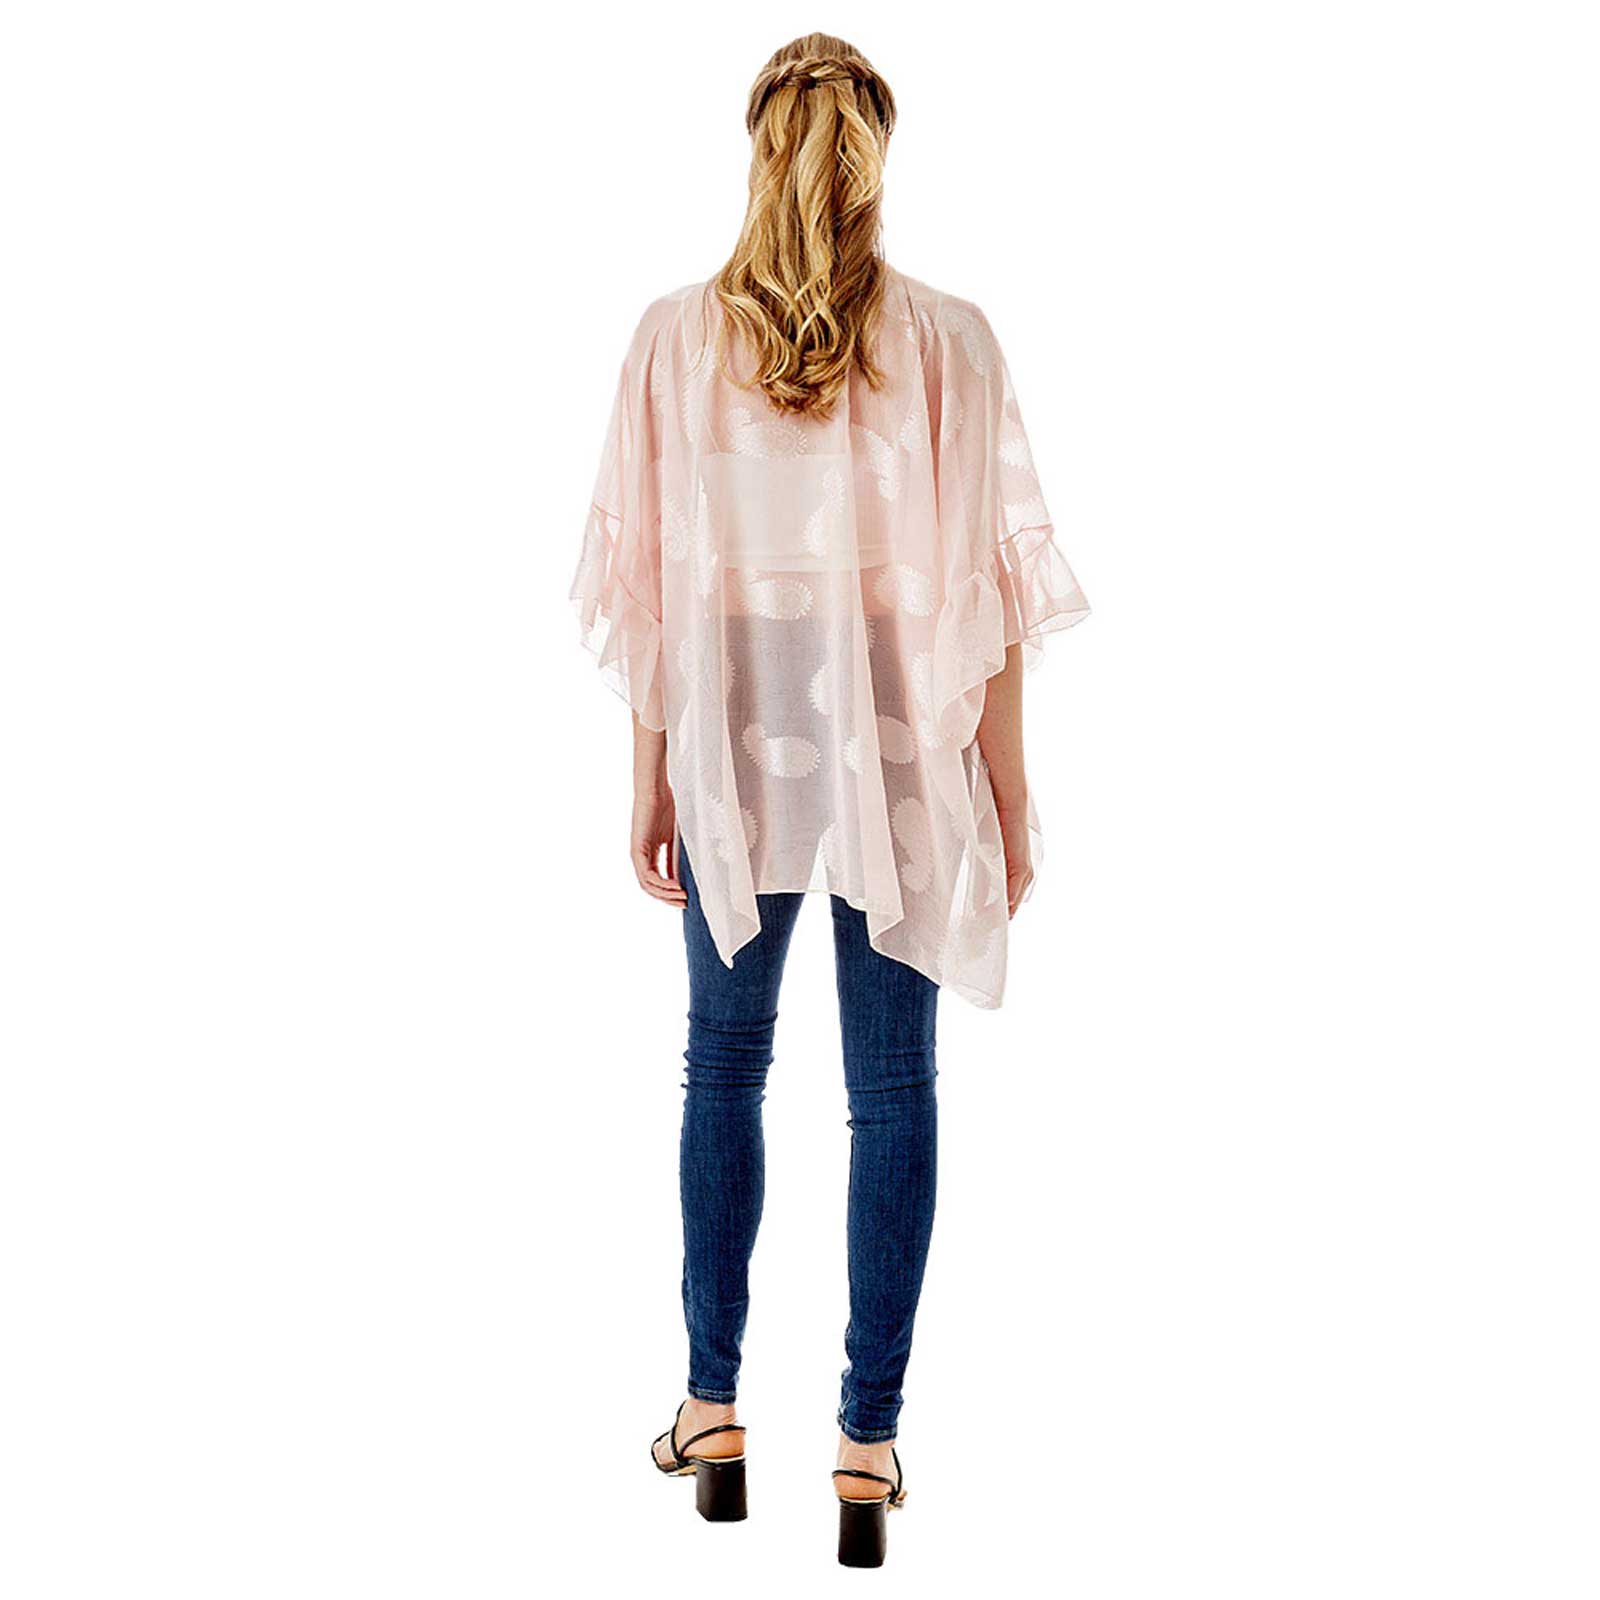 Pink Paisley Patterned Sheer Ruffle Sleeves Cover Up Kimono Poncho, The lightweight Kimono poncho top is made of soft and breathable Polyester material. short sleeve swimsuit cover up with open front design, simple basic style, easy to put on and down. Perfect Gift for Wife, Mom, Birthday, Holiday, Anniversary, Fun Night O